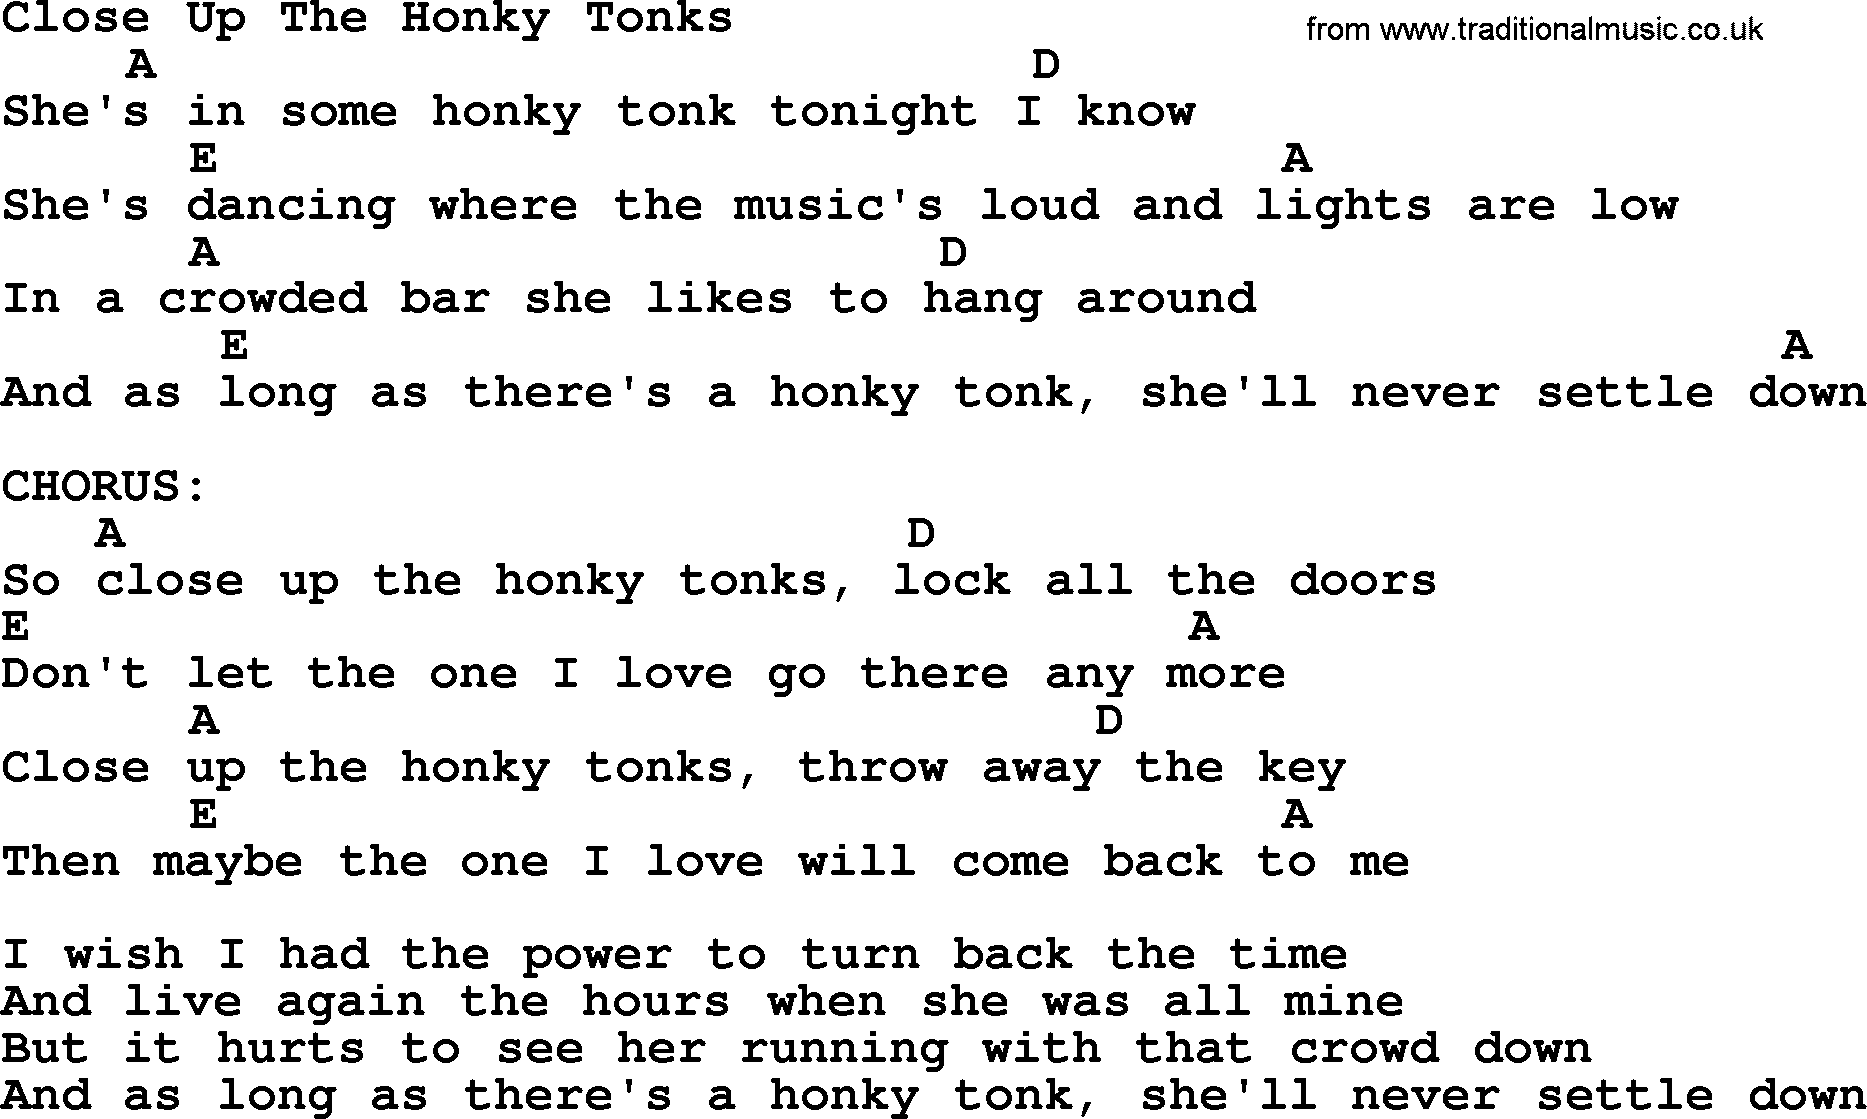 Bluegrass song: Close Up The Honky Tonks, lyrics and chords